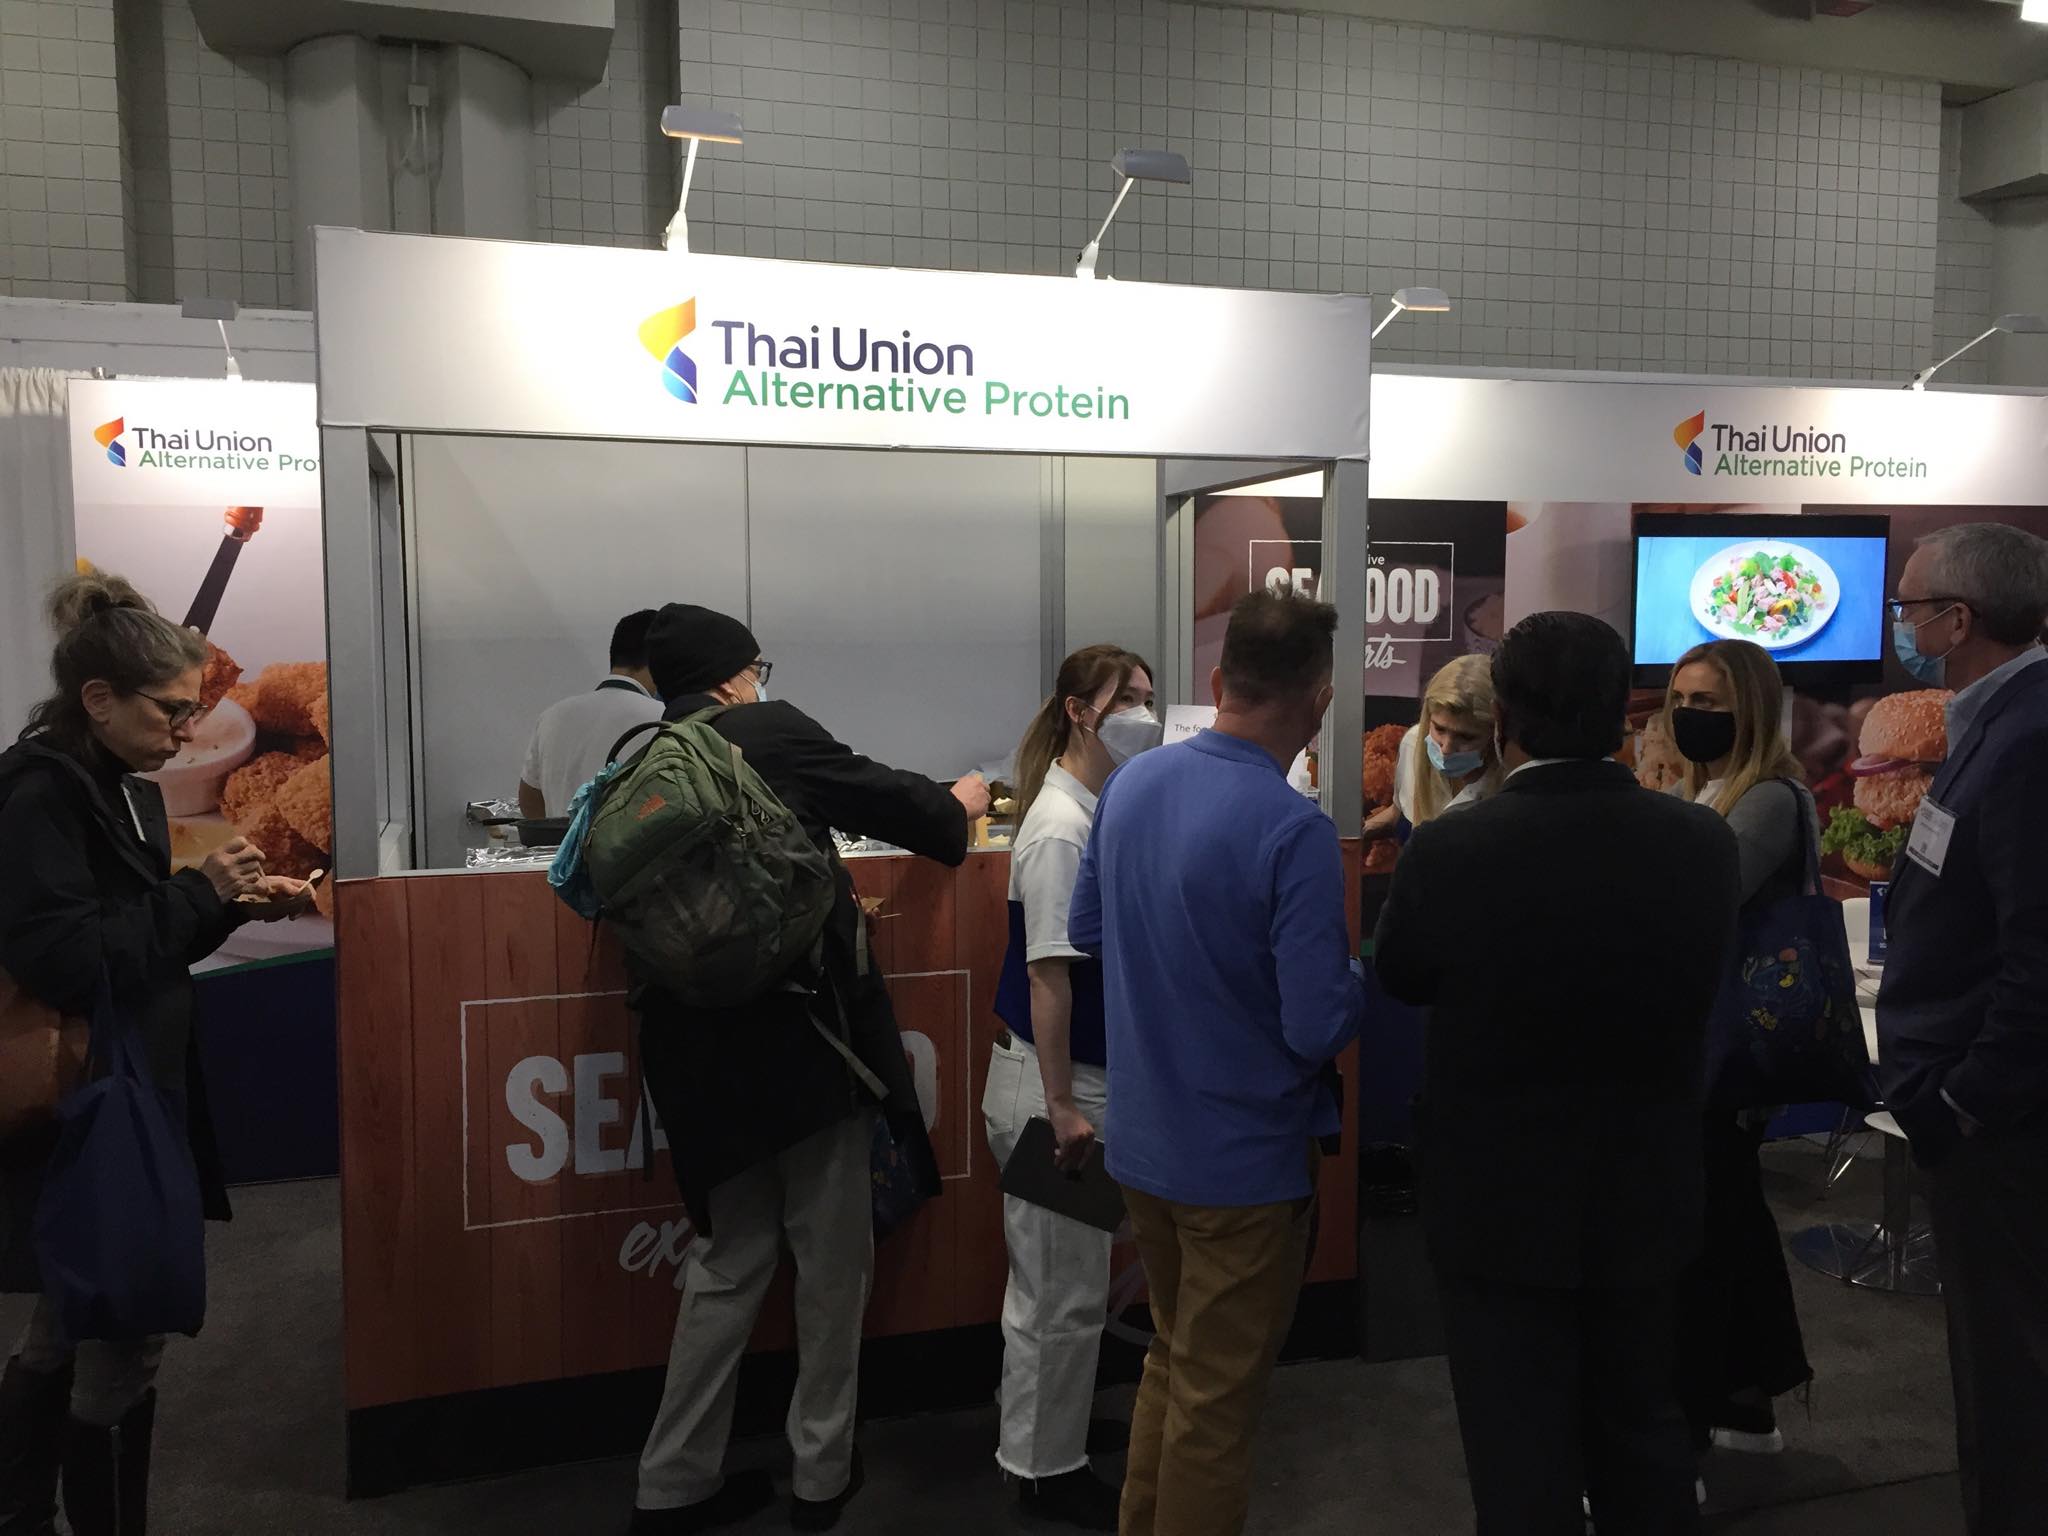 Join Thai Union Alternative Protein at 2021 Plant Based World Expo in New York City